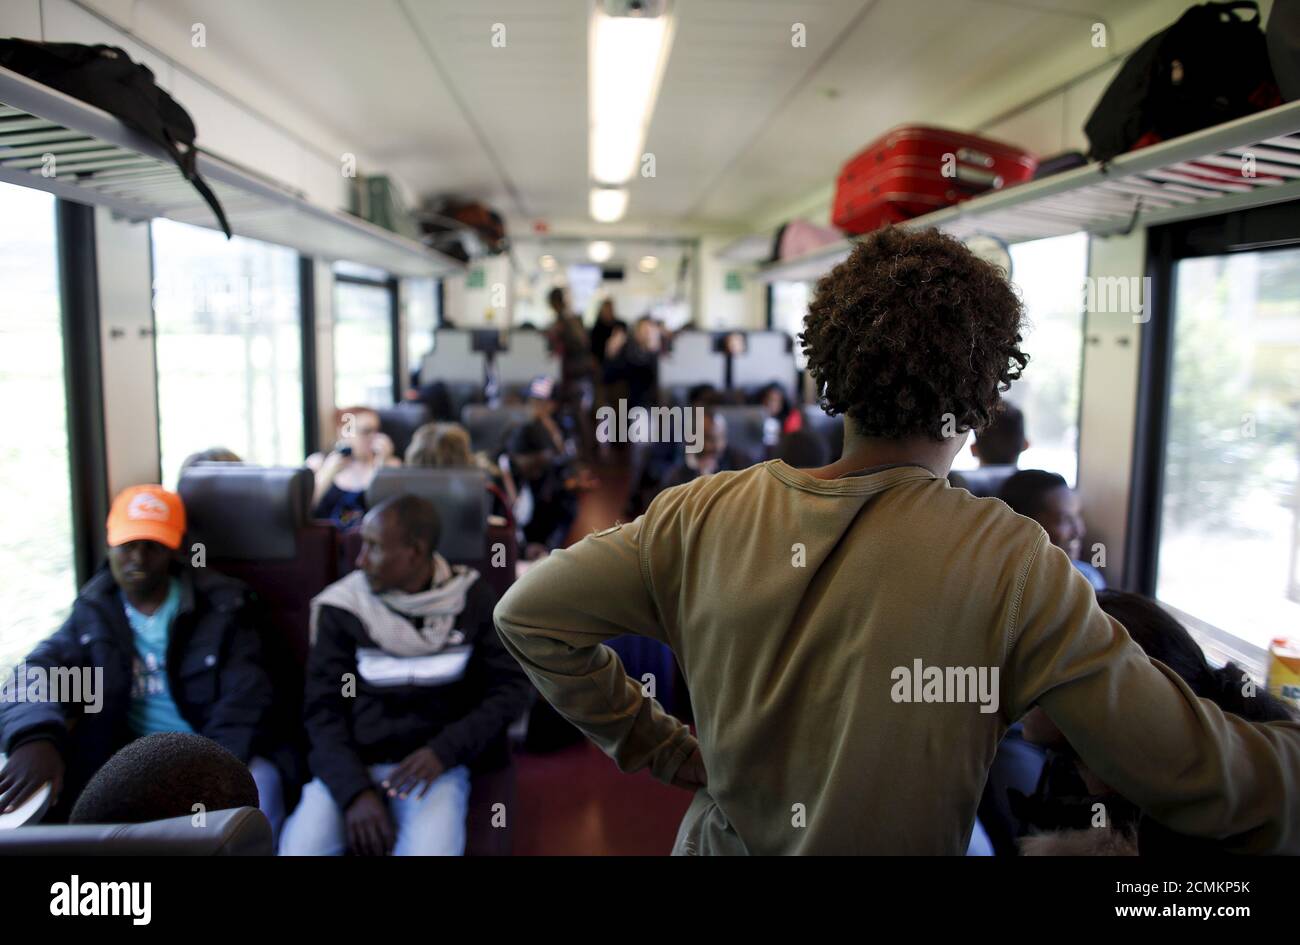 Migrants travel on a train from Bolzano to Brenner, northern Italy, May 28, 2015. EU asylum rules, known as the Dublin Regulation, were first drafted in the early 1990s and require people seeking refuge to do so in the European country where they first set foot. Northern European countries defend the policy as a way to prevent multiple applications across the continent. Some are upset with what they see as Italy's lax attitude to registering asylum seekers. Earlier this year, French police stopped about 1,000 migrants near the border and returned them to Italy. Smaller round-ups happen daily i Stock Photo